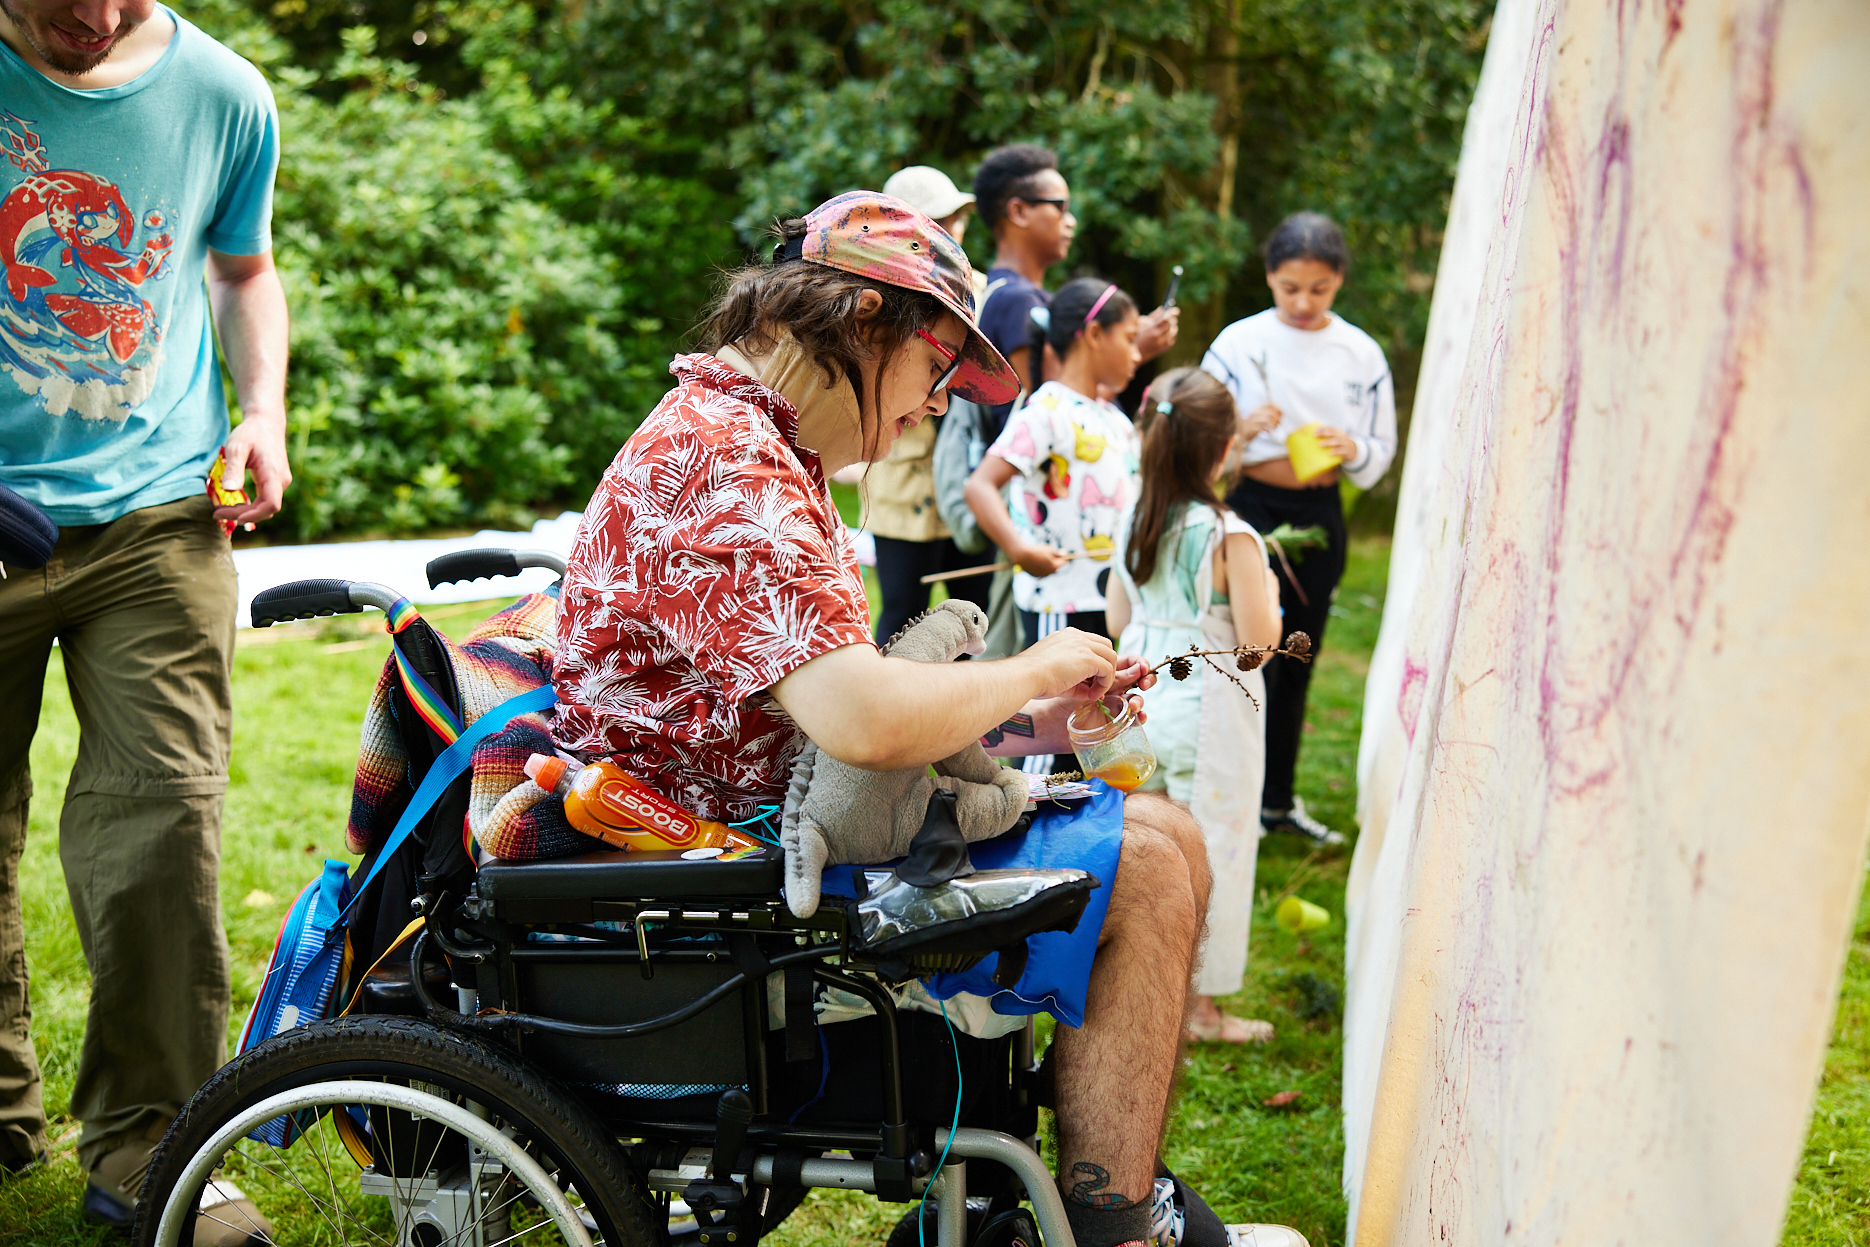 A wheelchair user painting onto a piece of suspended fabric outdoors.